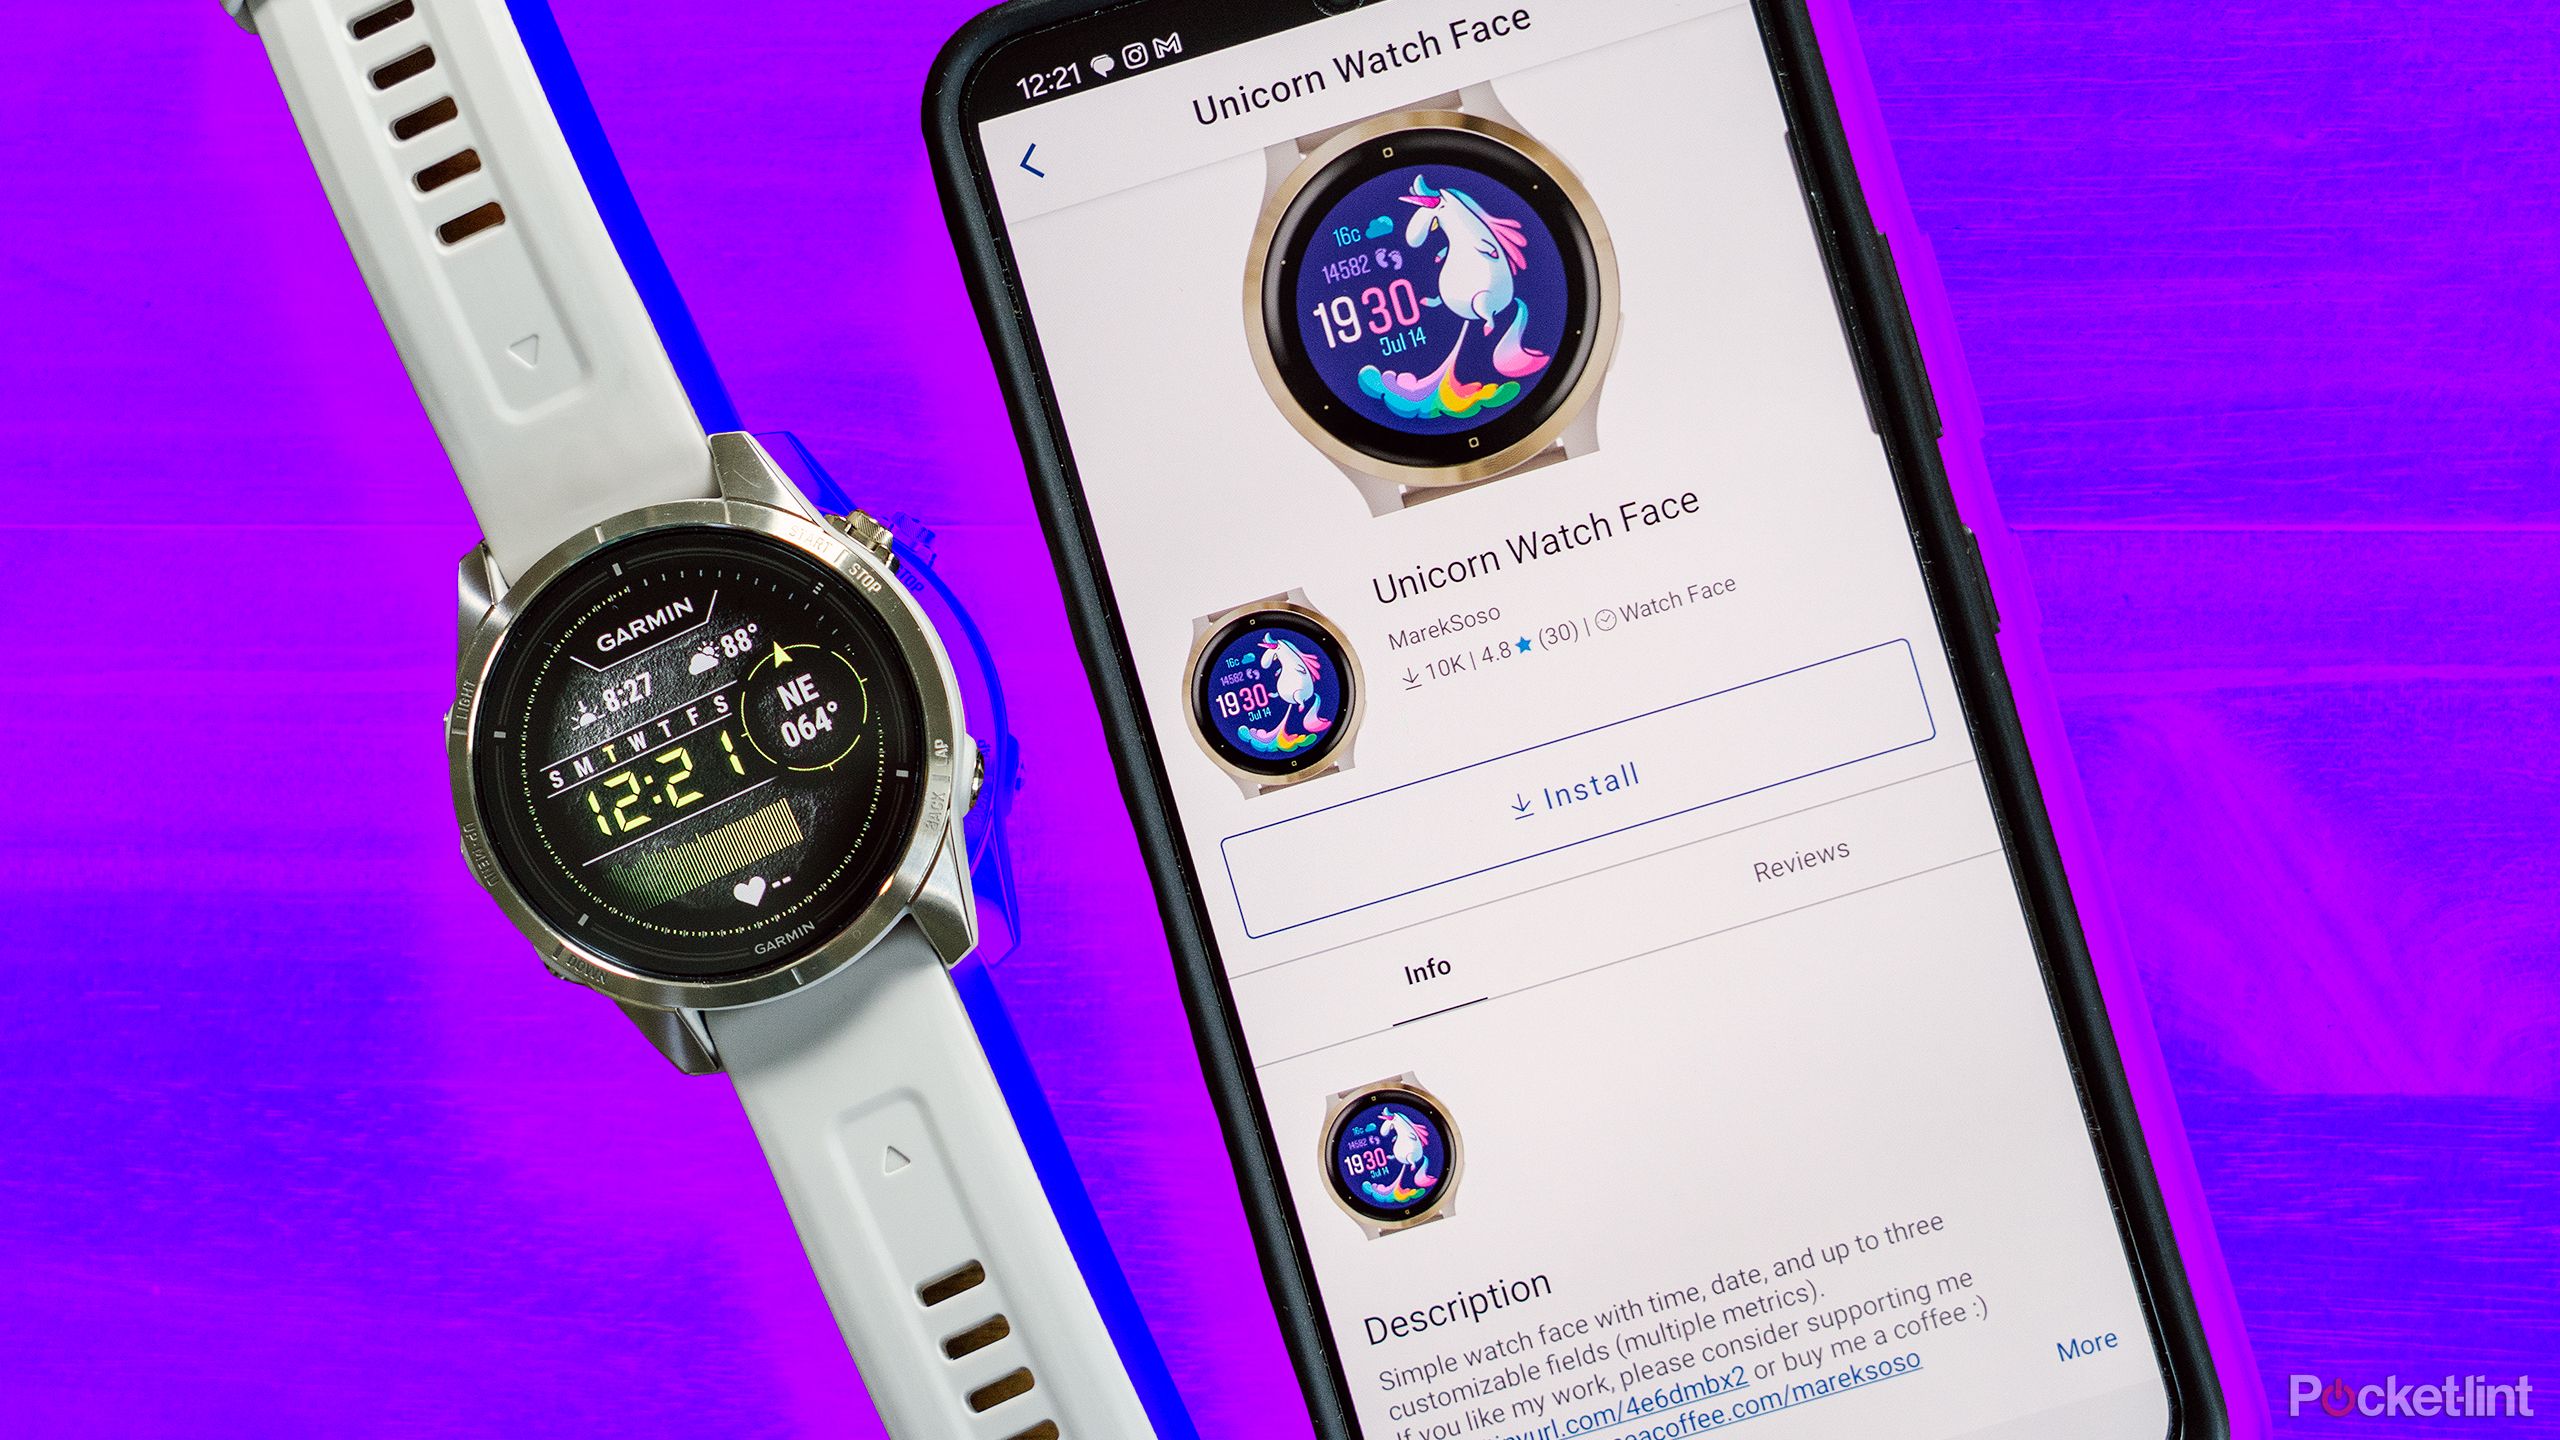 How to download new watch faces for a Garmin watch